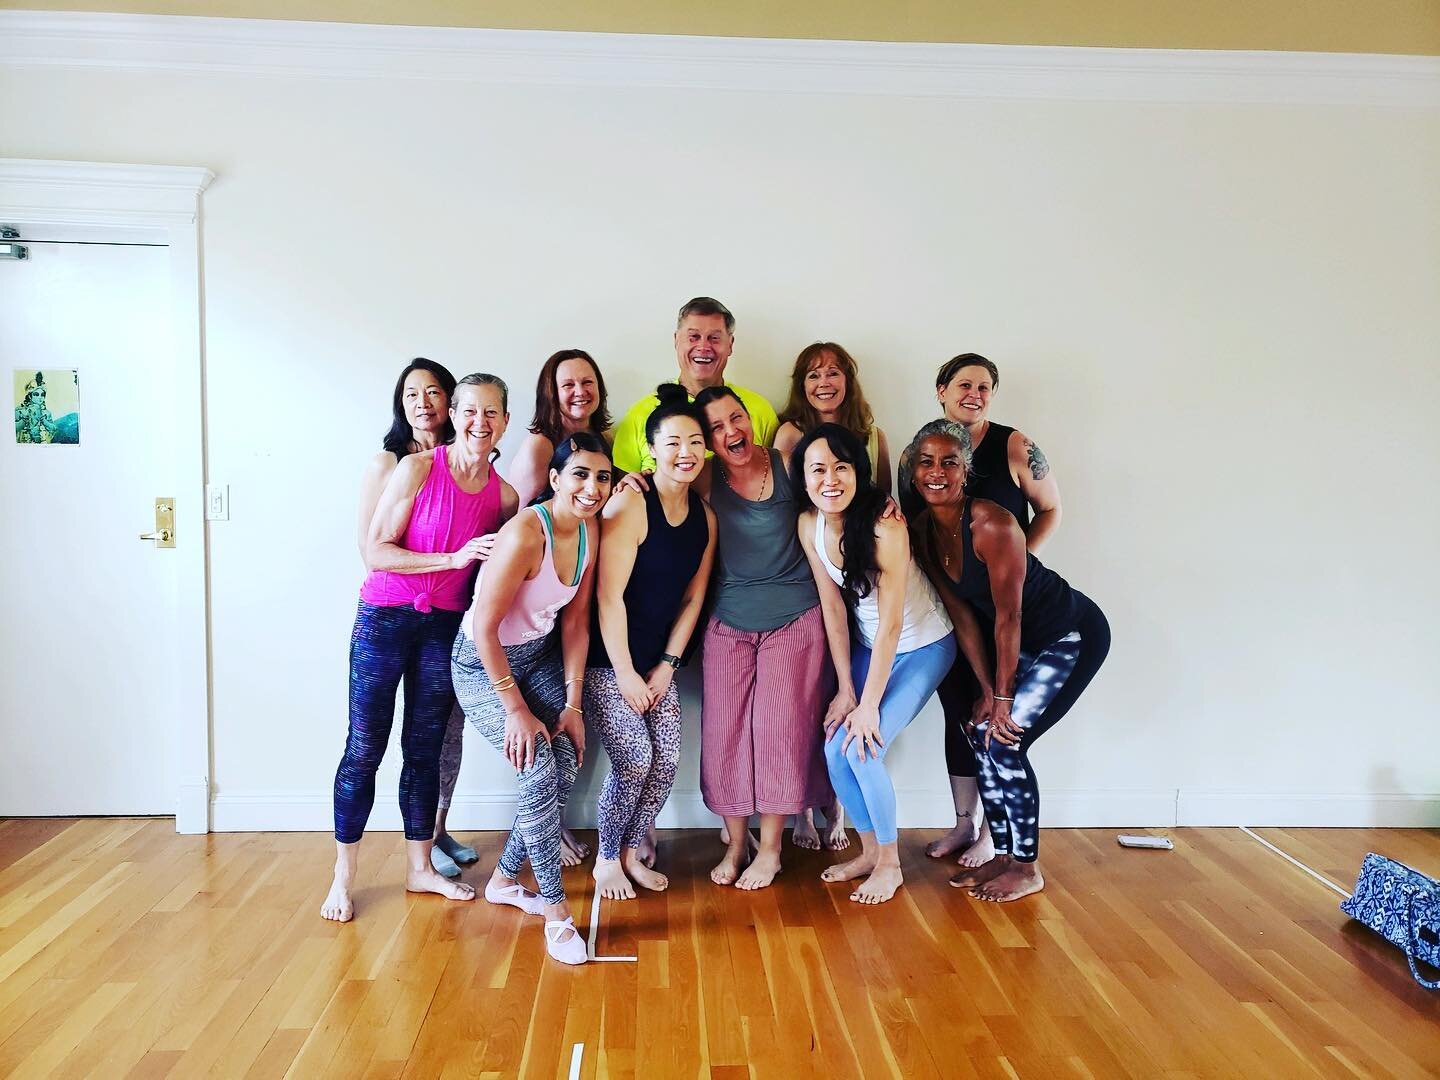 The Morning crew!  And A little breakfast social to give Braja a farewell!  The morning yogis are lively, welcoming, and make the vibe awesome in the AM!  You should come practice with us. 😊

We will miss you so much Braja @braja_kishori !  Thank yo